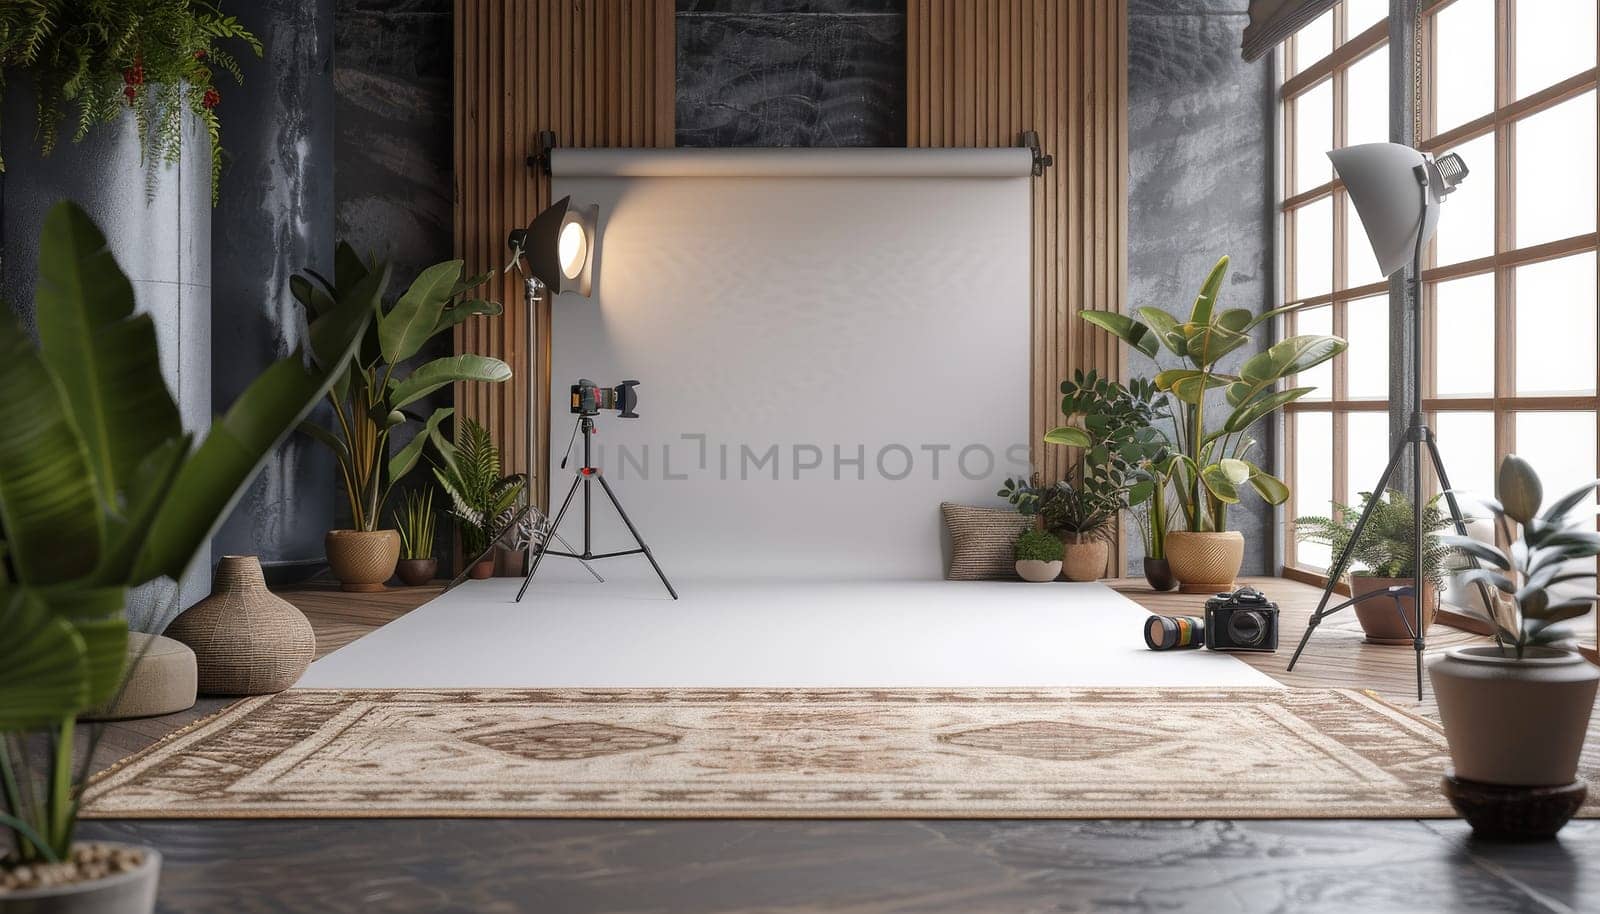 A studio with a white background and a large plant in the foreground. The studio is set up for photography and has a lot of plants